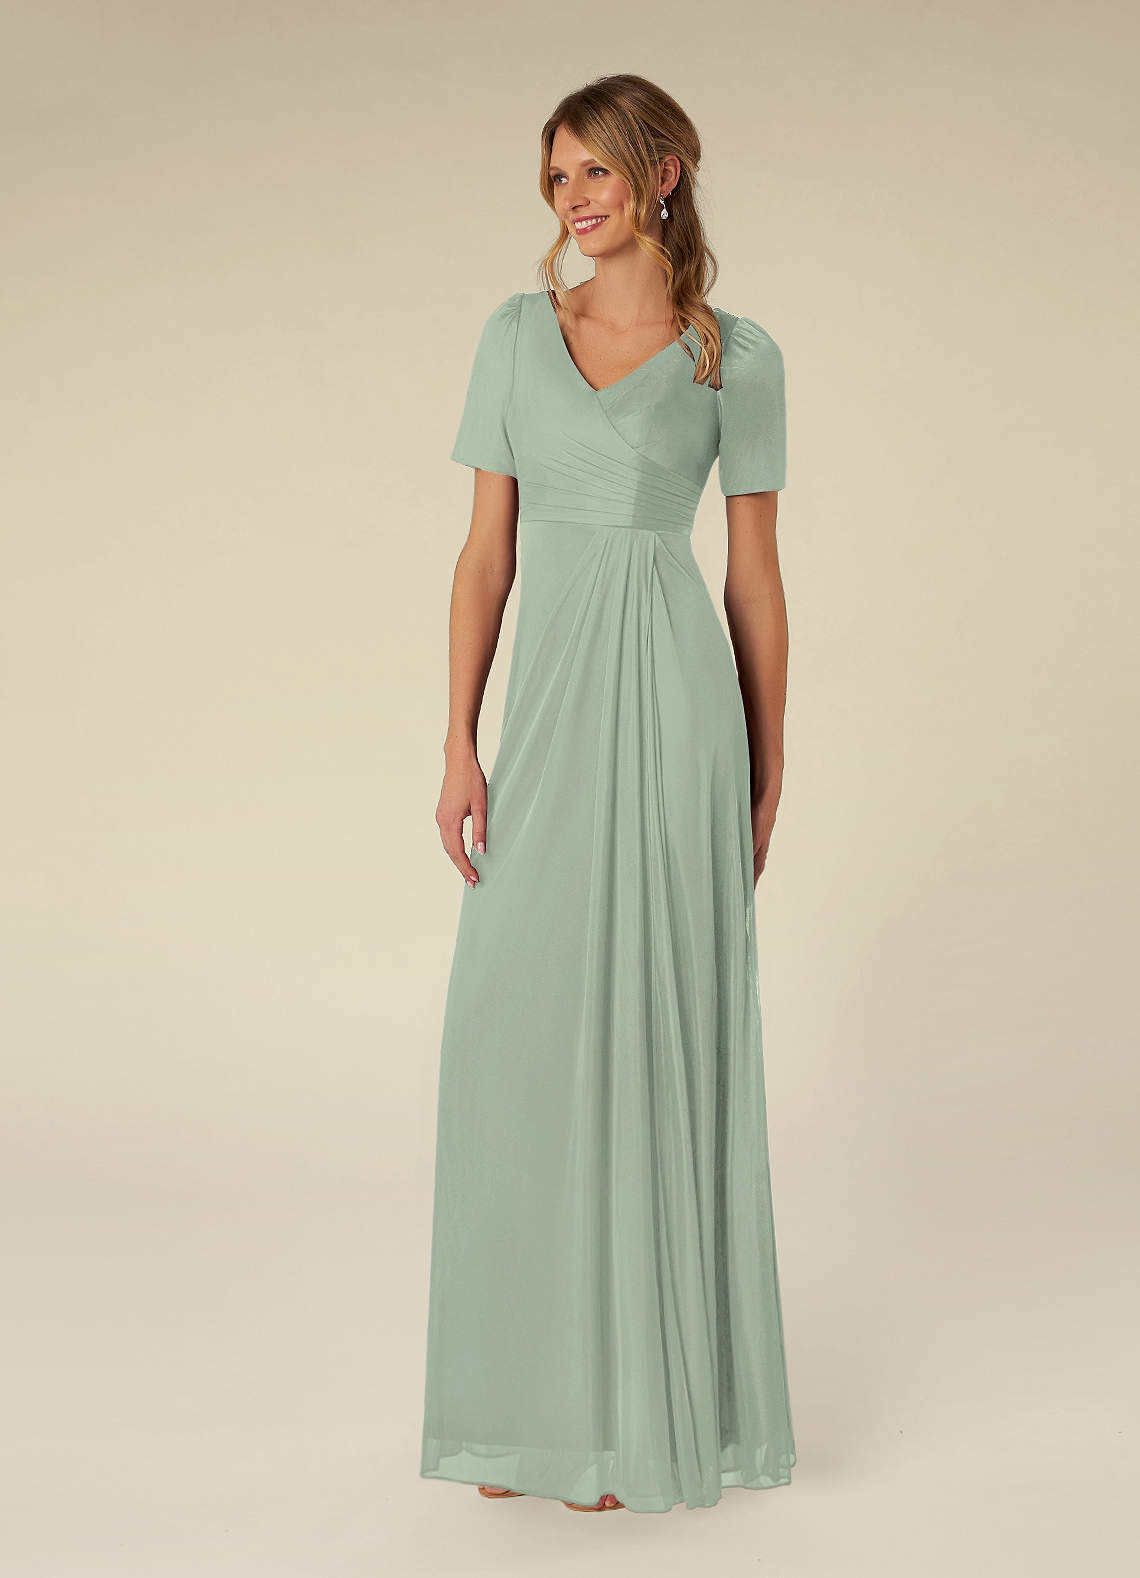 Azazie Bessie Mother of the Bride Dresses A-Line Pleated Mesh Floor-Length Dress image1